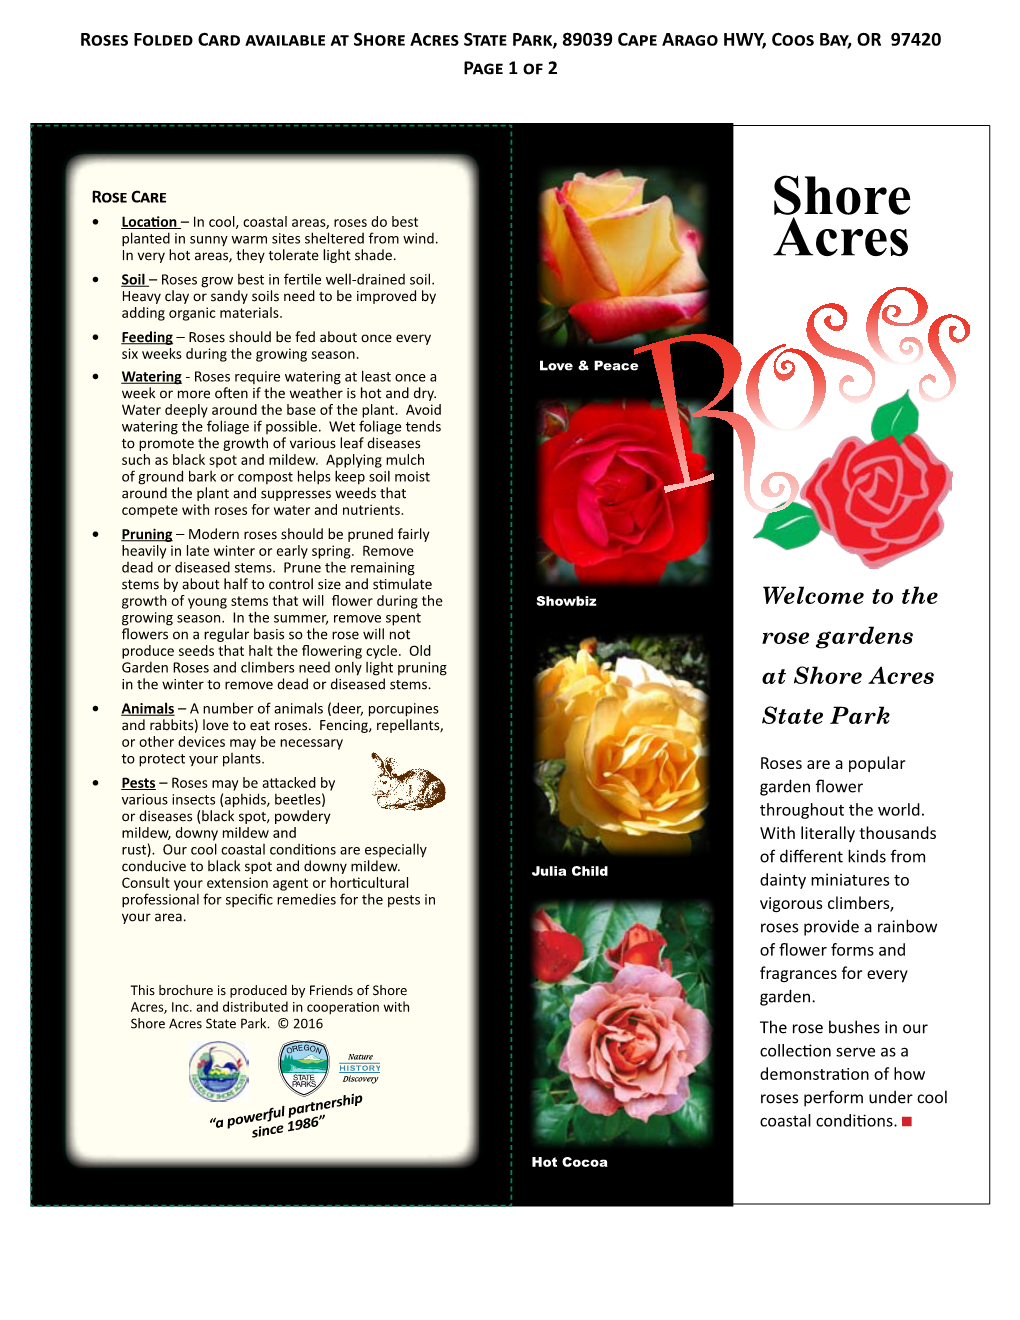 Roses Folded Card Available at Shore Acres State Park, 89039 Cape Arago HWY, Coos Bay, OR 97420 Page 1 of 2